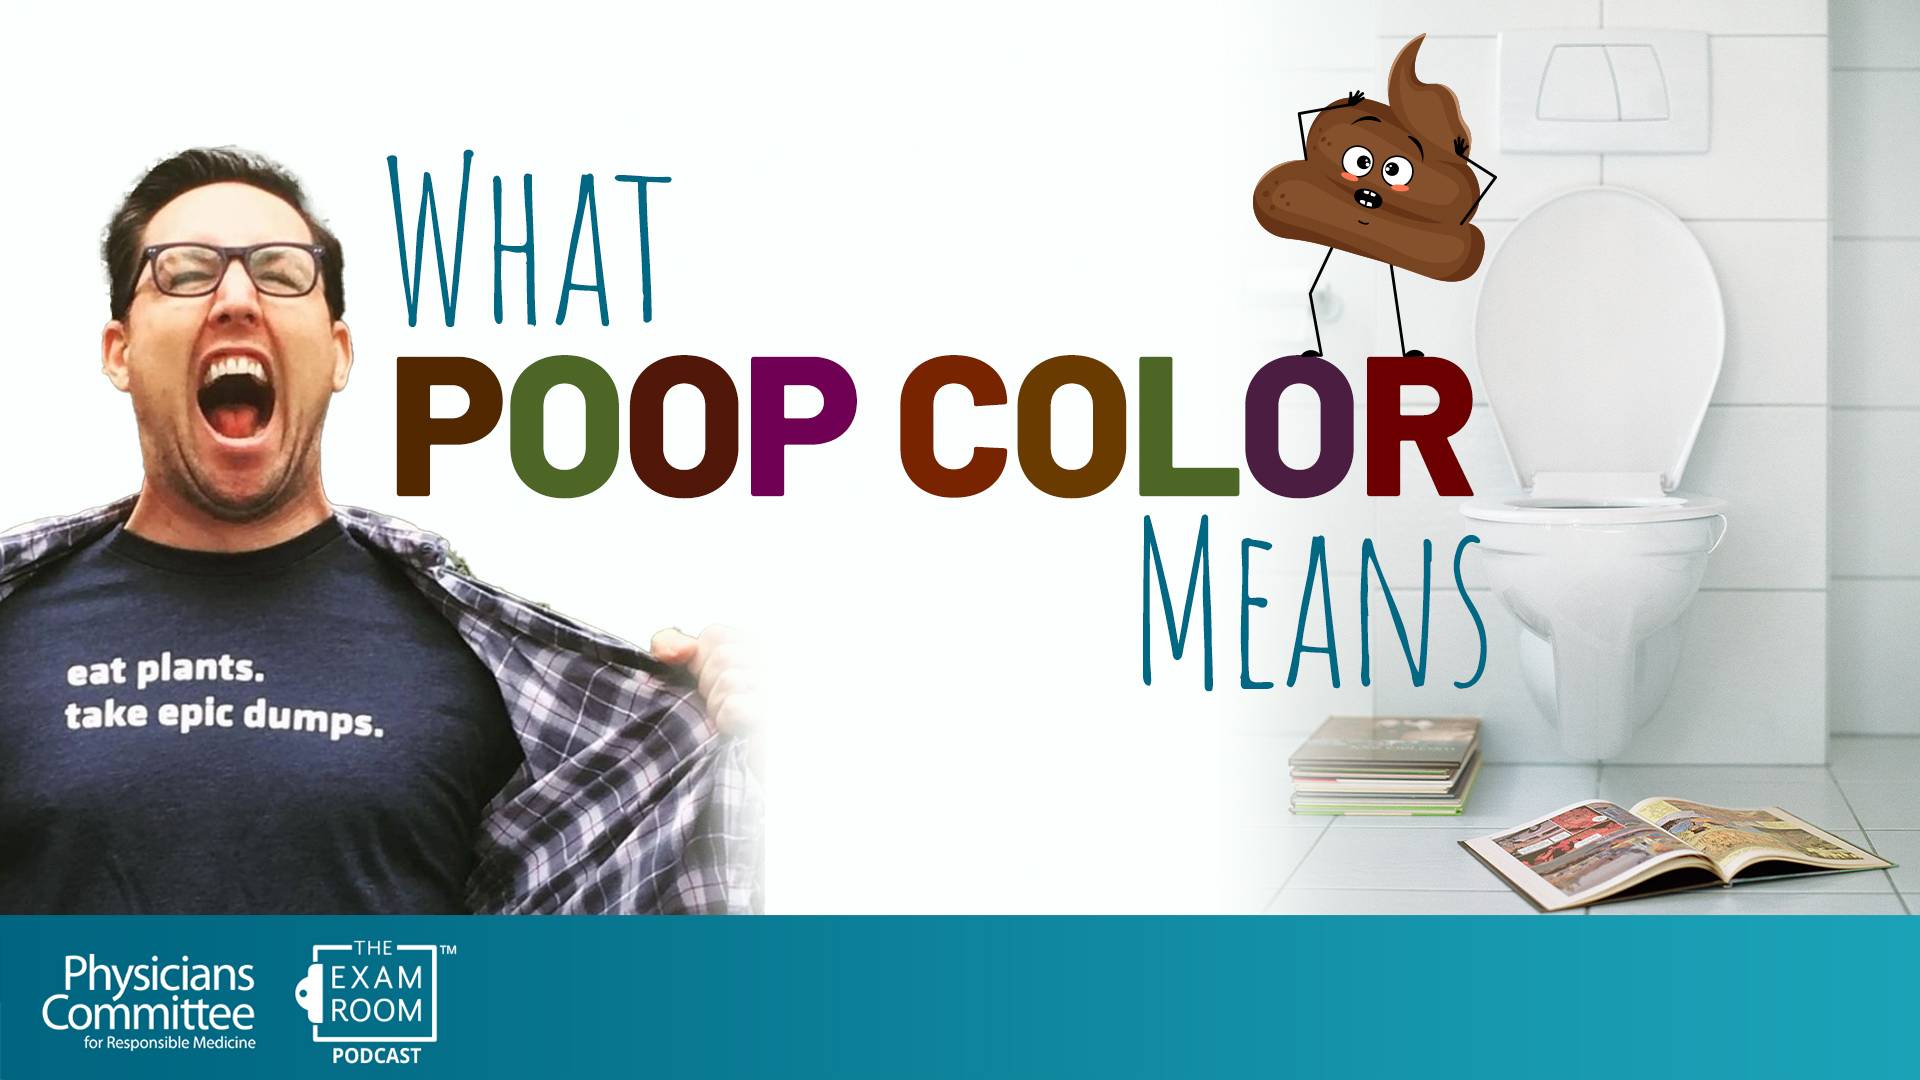 The Color of Poop and What It Means | Dr. Will Bulsiewicz Live Q&A